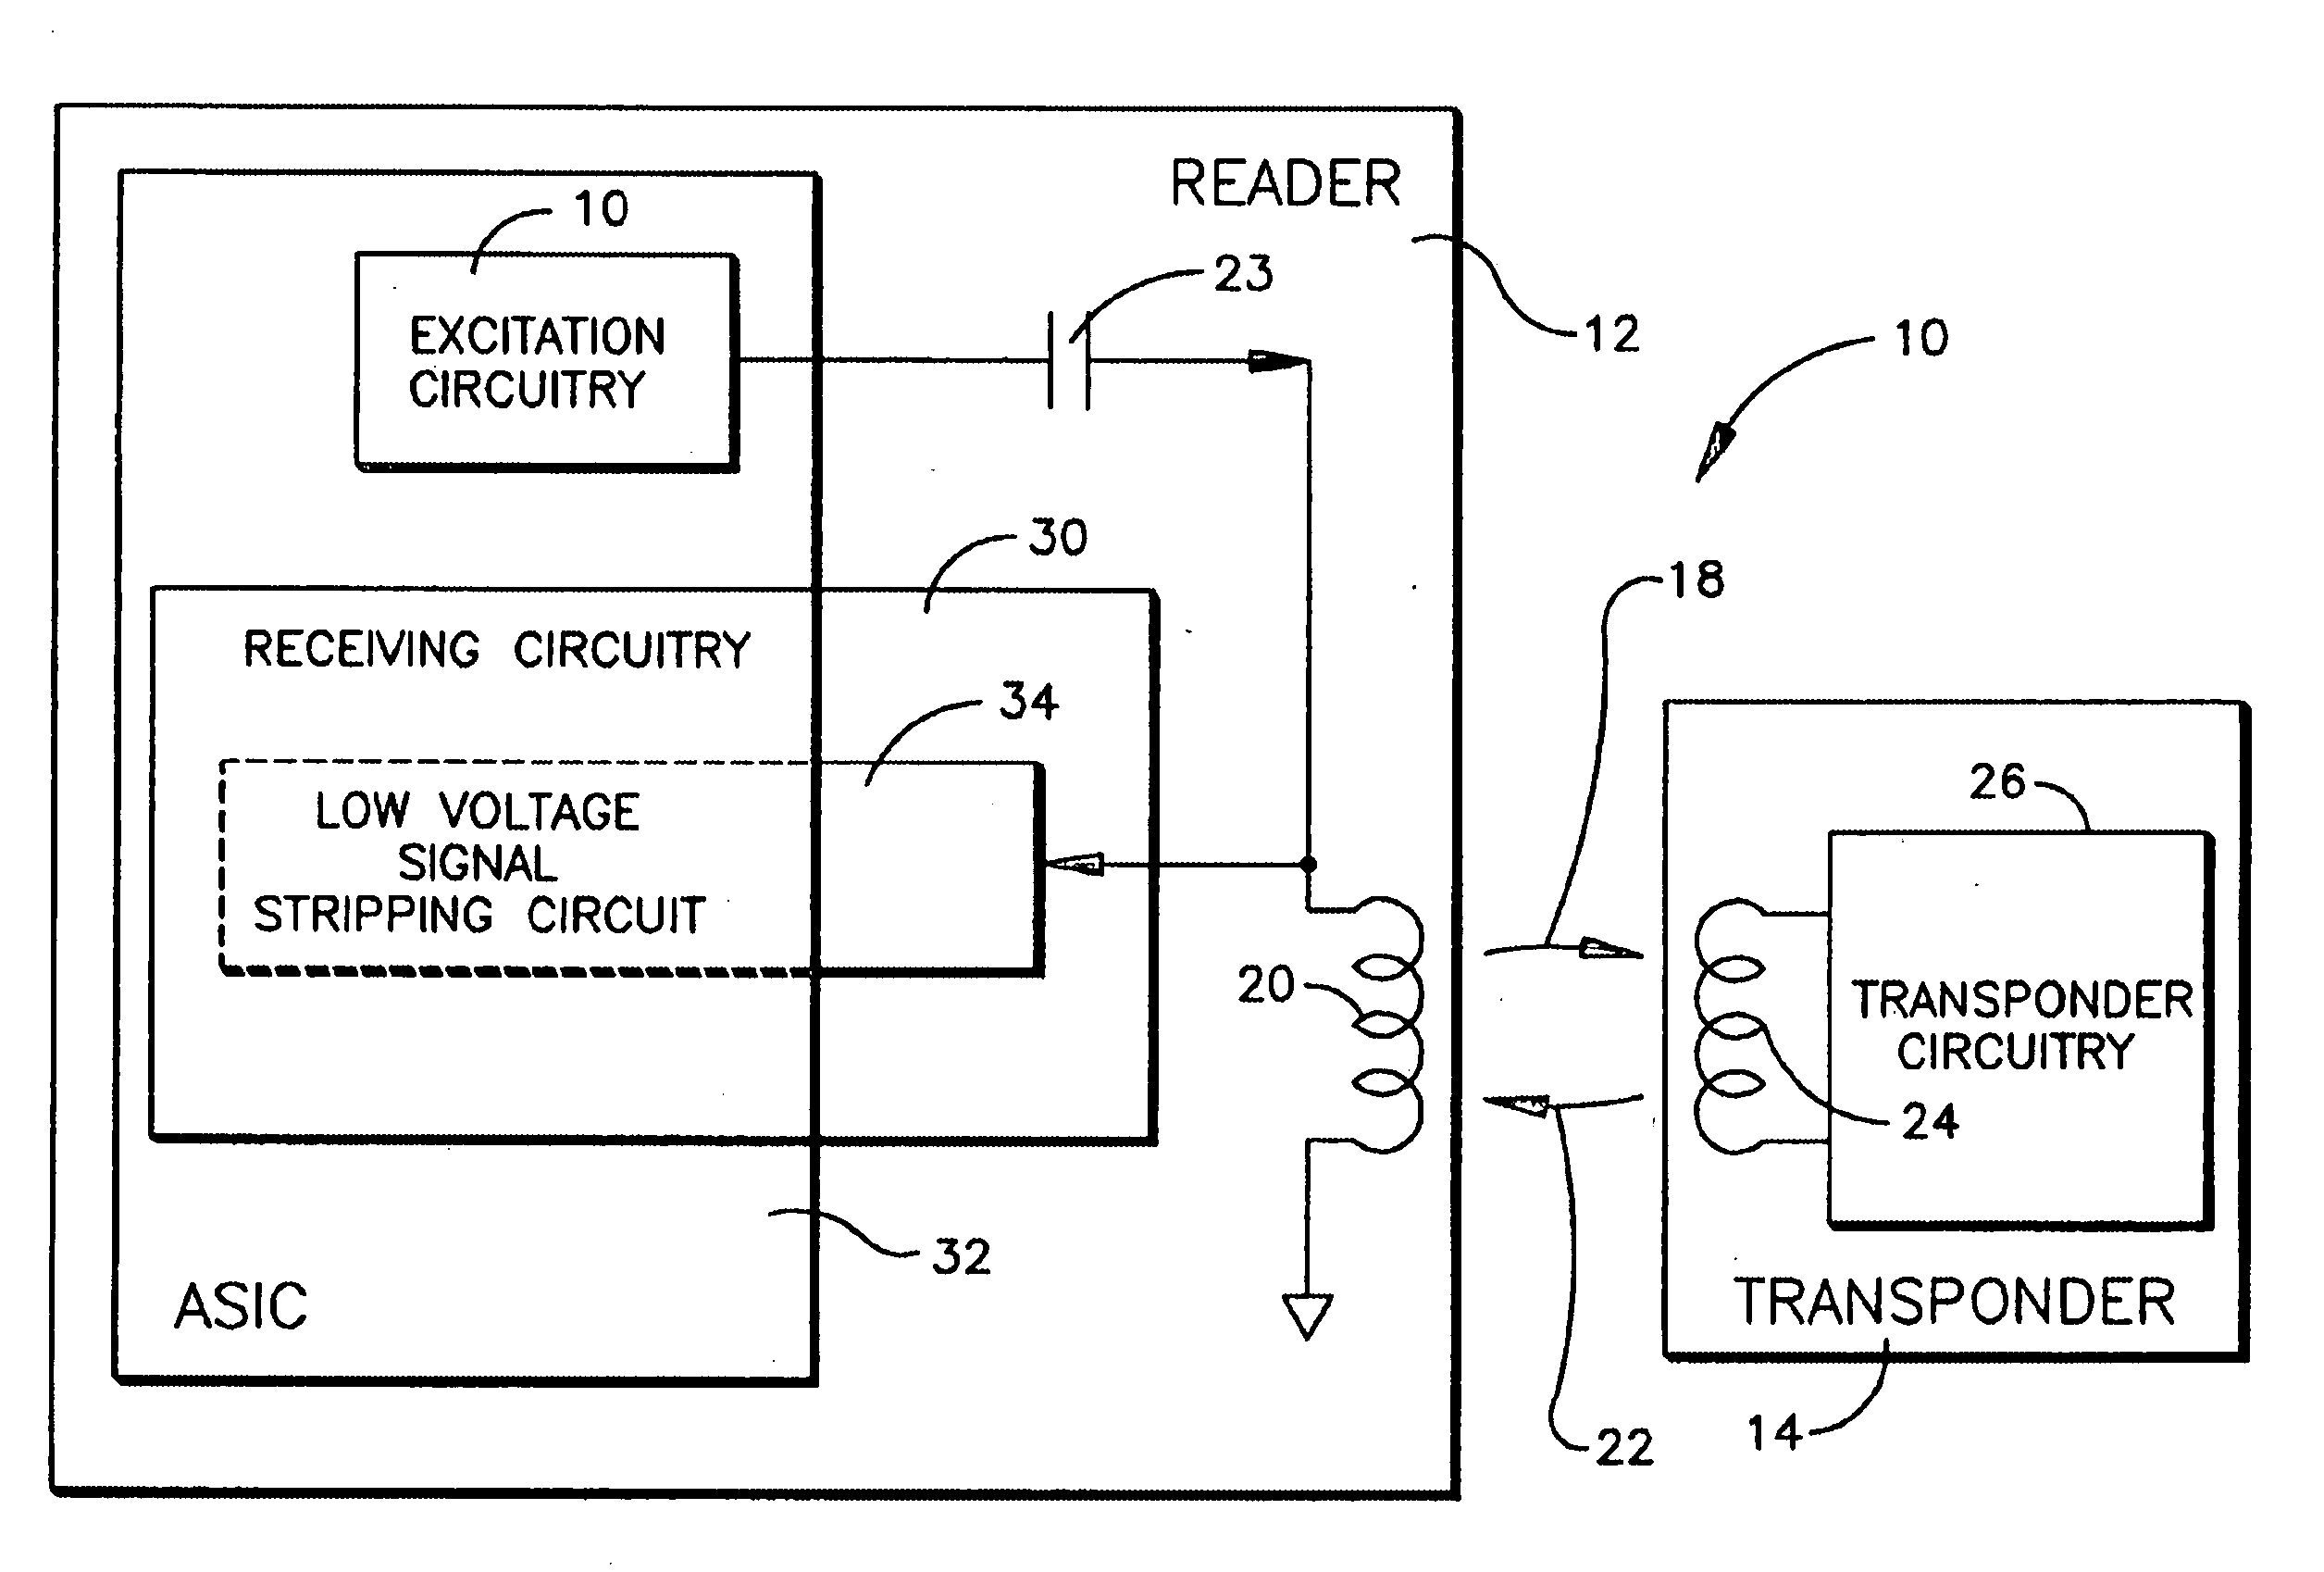 Low voltage signal stripping circuit for an RFID reader